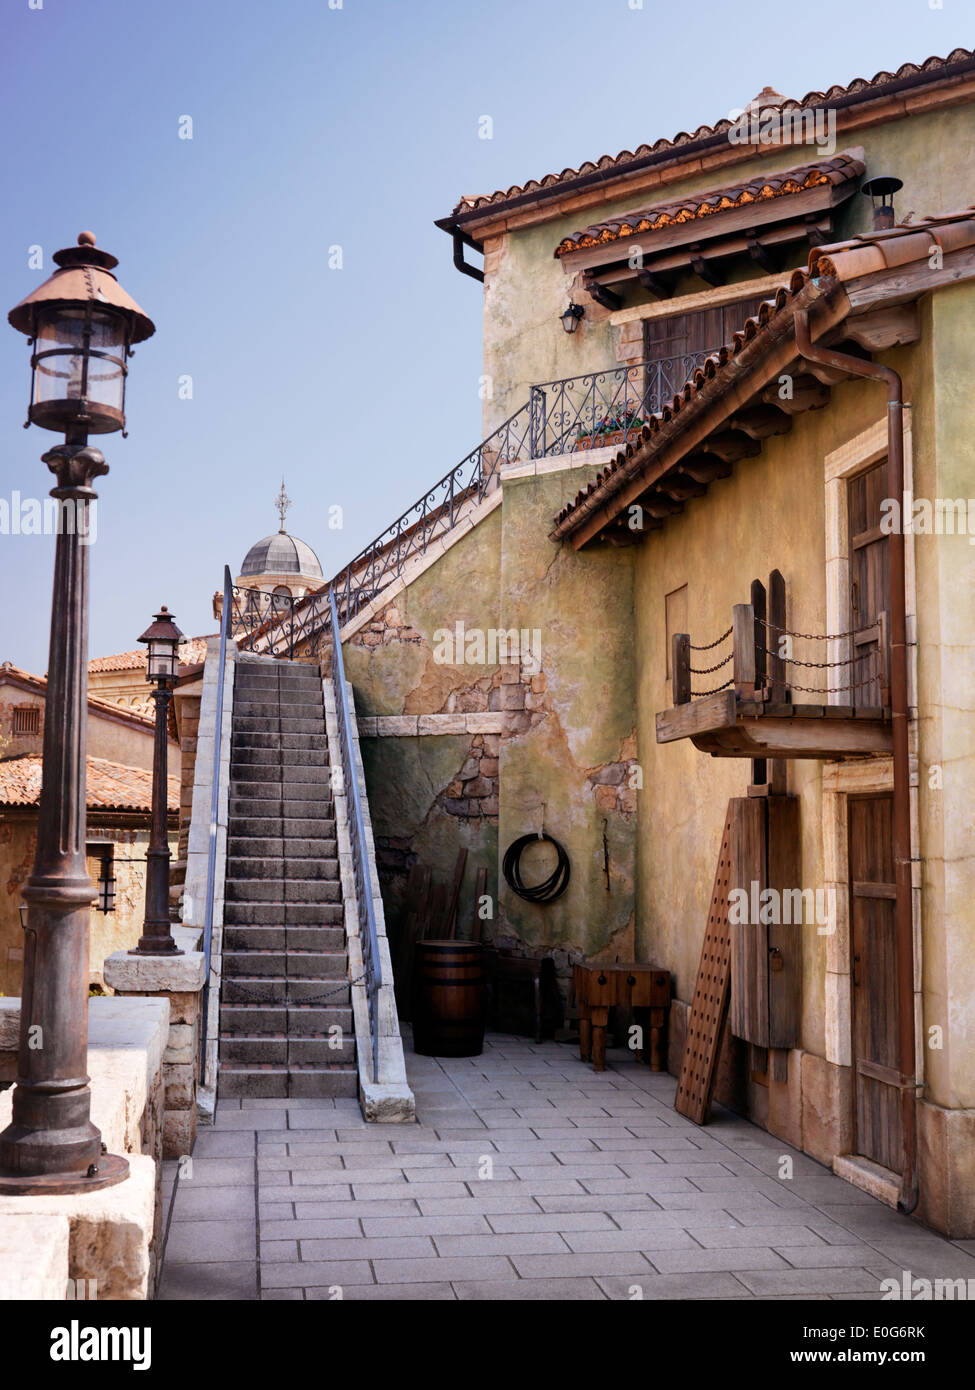 Antique old house in Italian architecture style Stock Photo